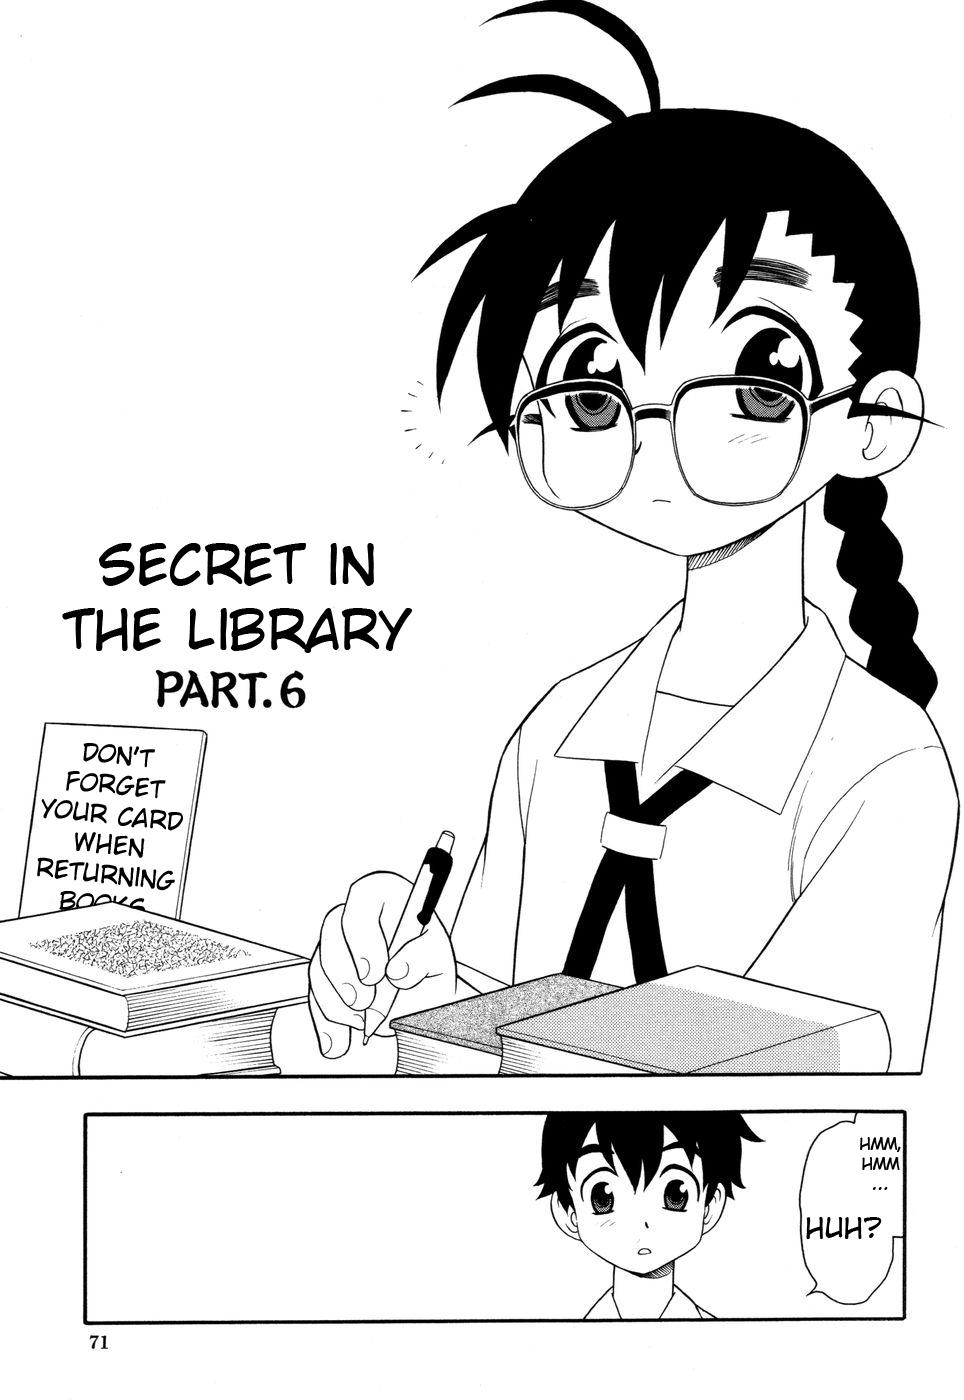 Toshoshitsu no Himitsu - Secret In Library. | Secret In The Library 73